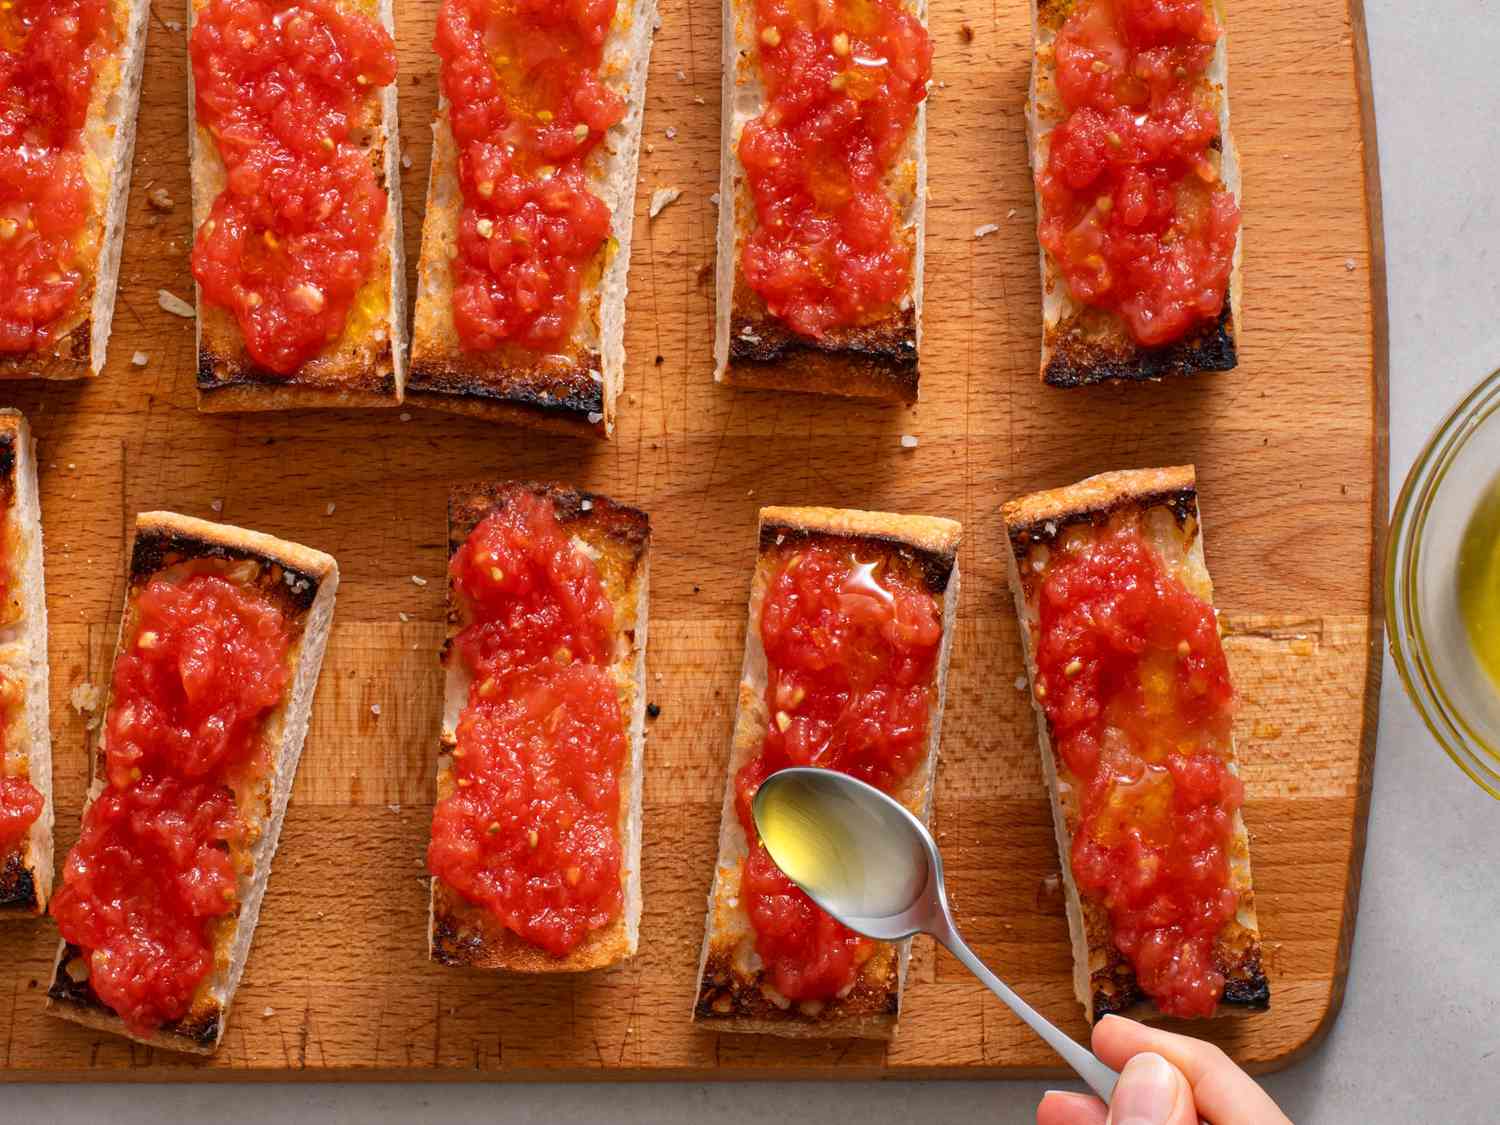 The pan con tomate being drizzled with olive oil from a spoon.